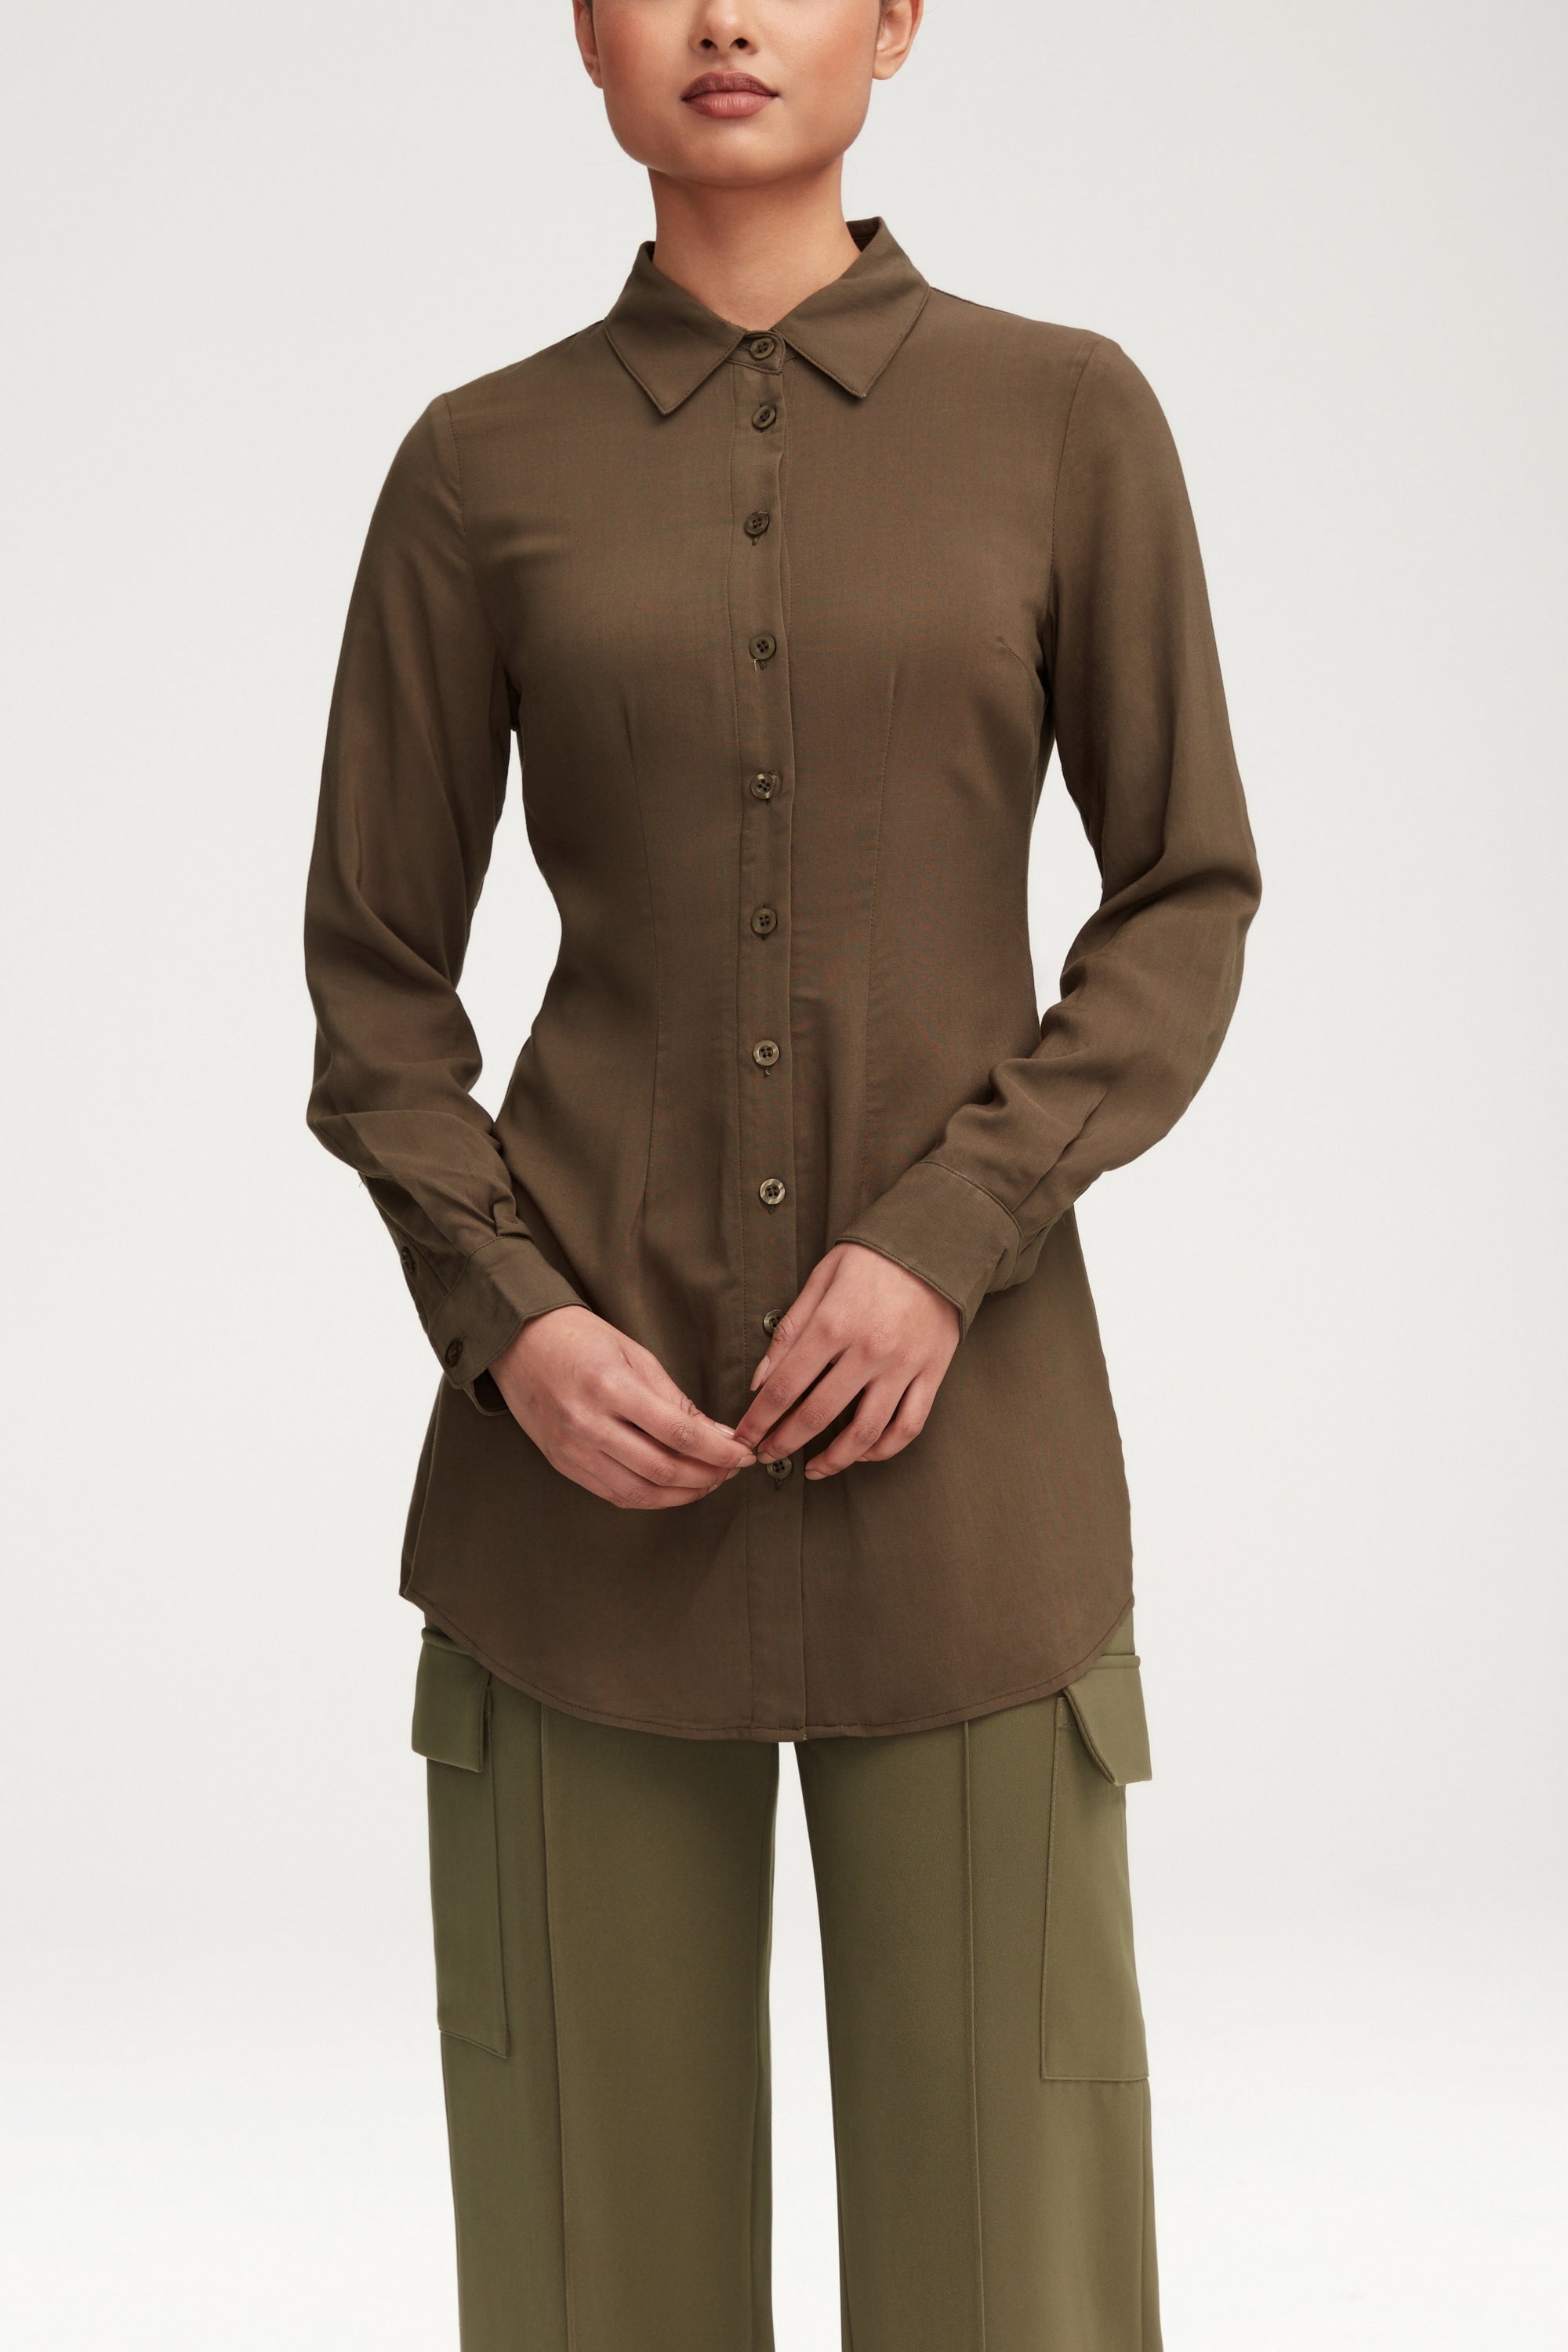 Sarah Fitted Button Down Top - Dark Olive Clothing epschoolboard 